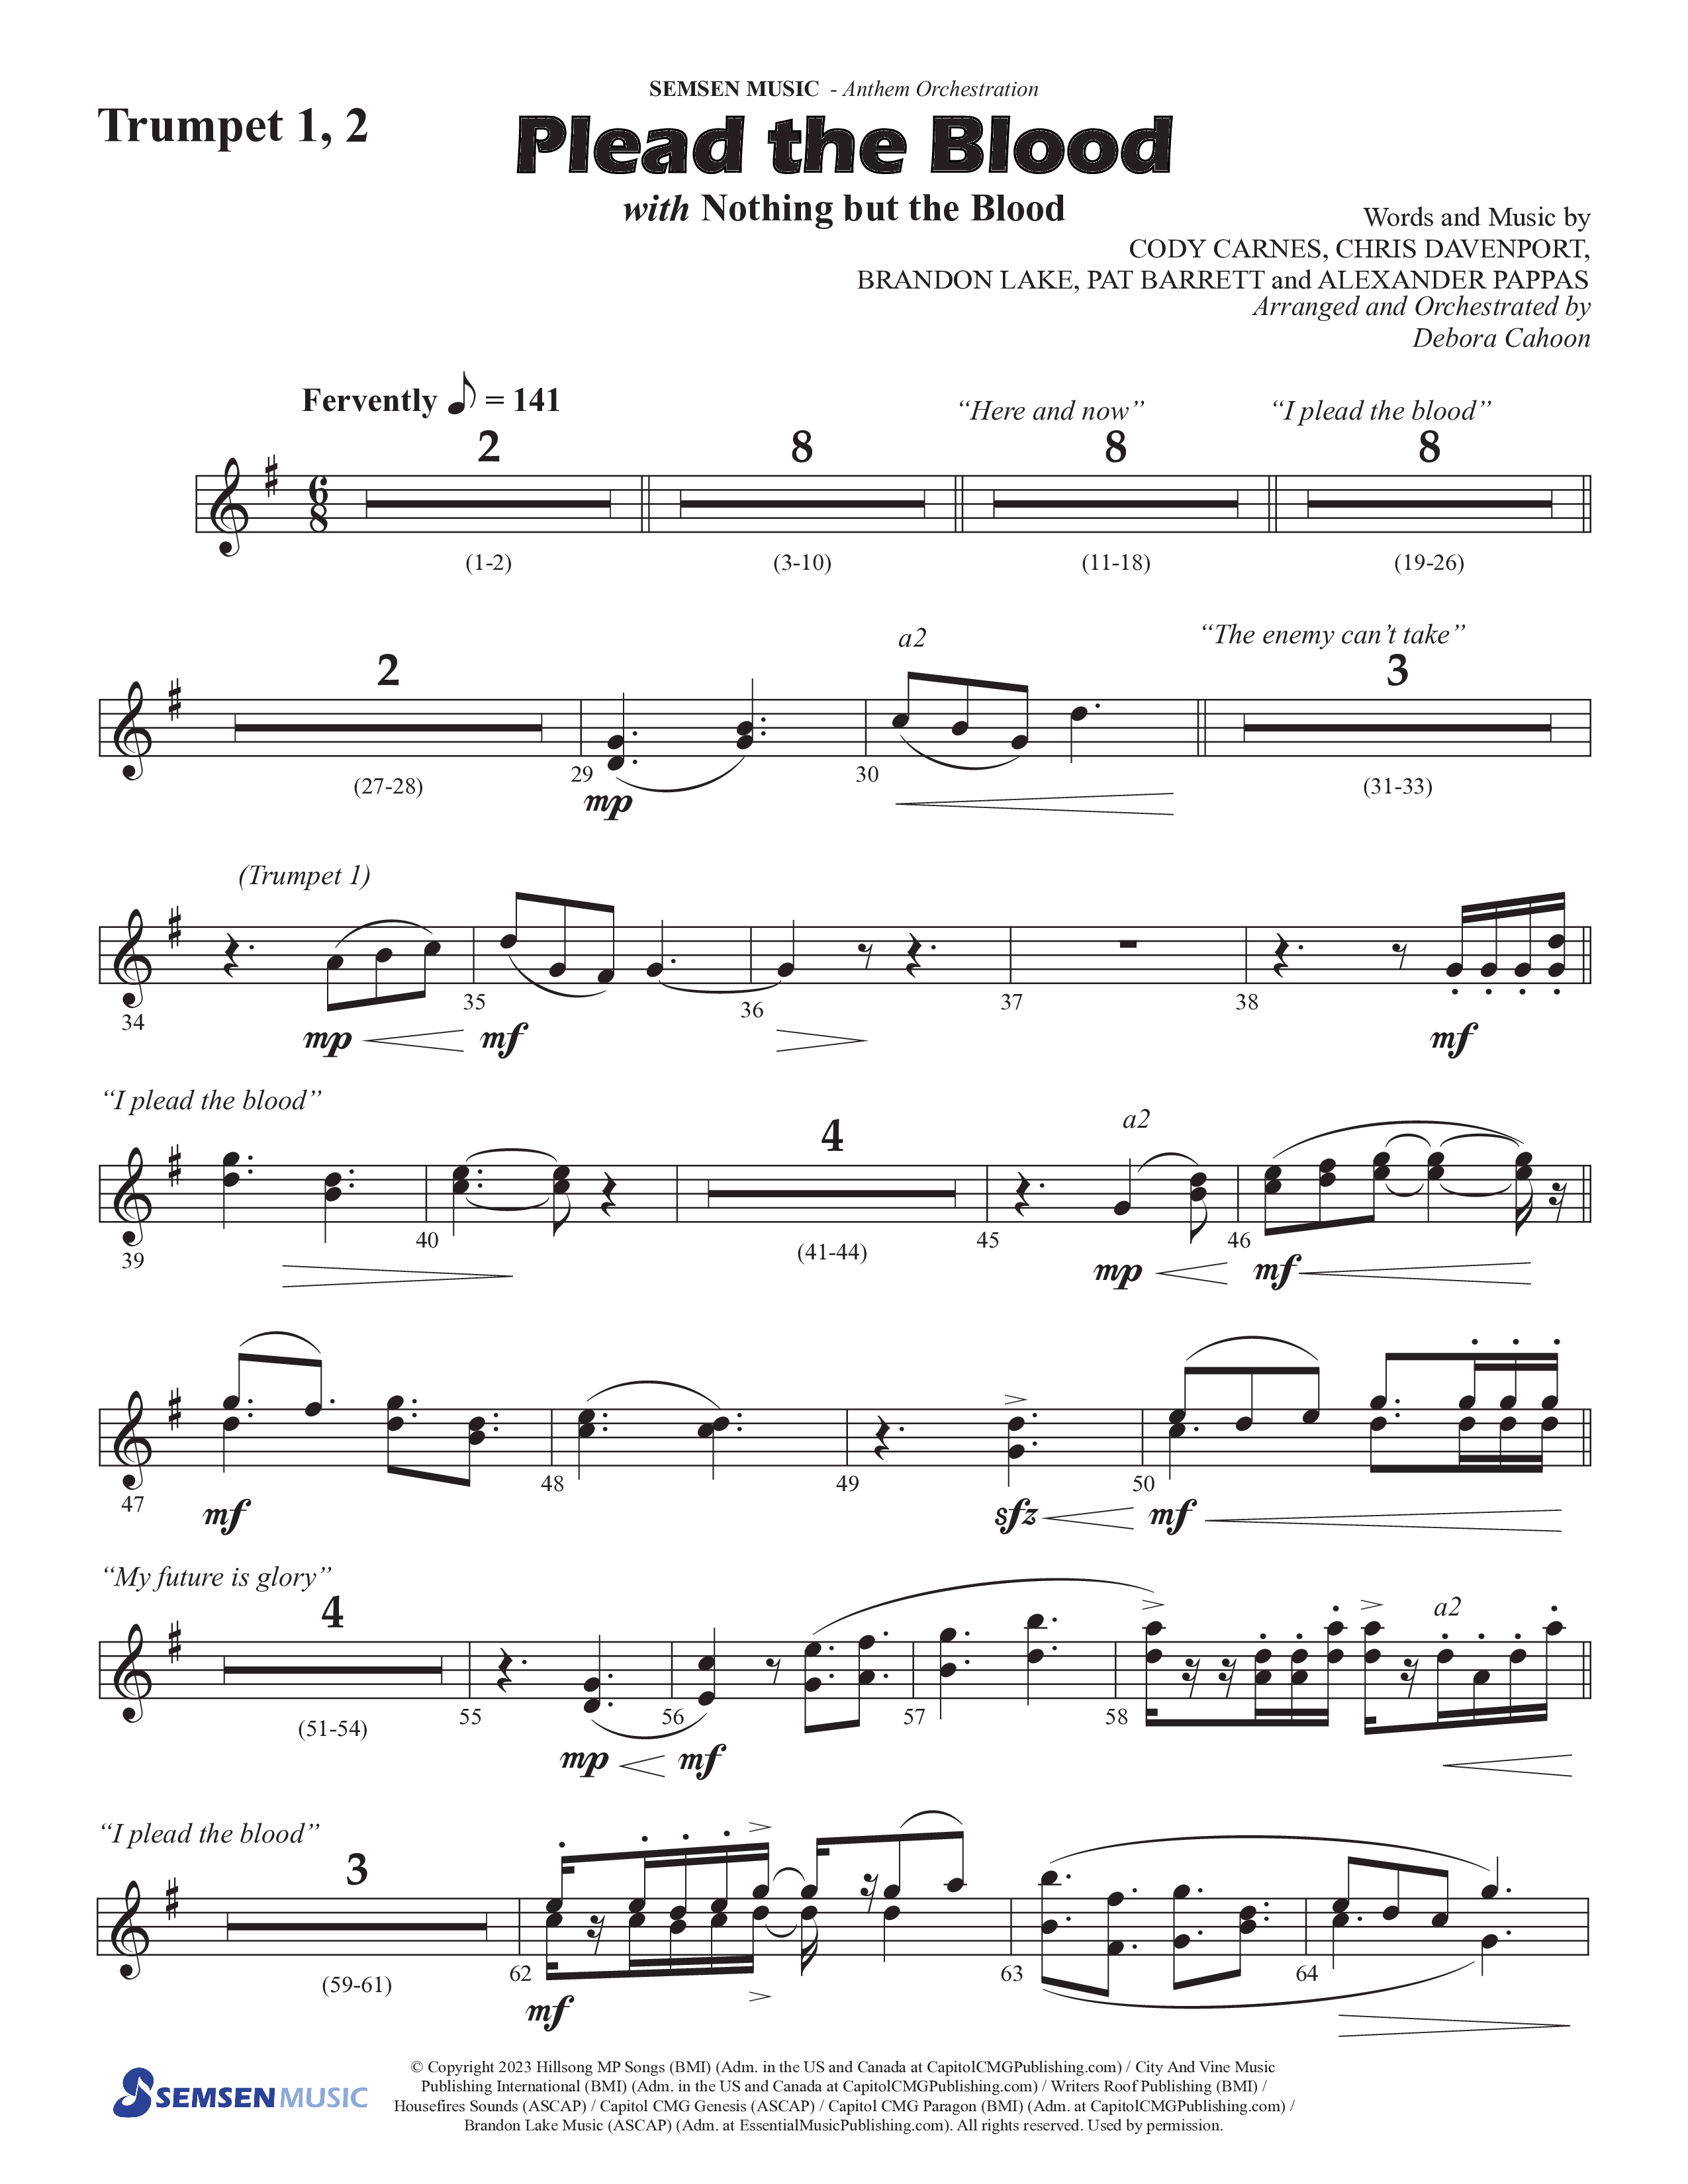 Plead The Blood (with Nothing But The Blood) (Choral Anthem SATB) Trumpet 1,2 (Semsen Music / Arr. Debora Cahoon)